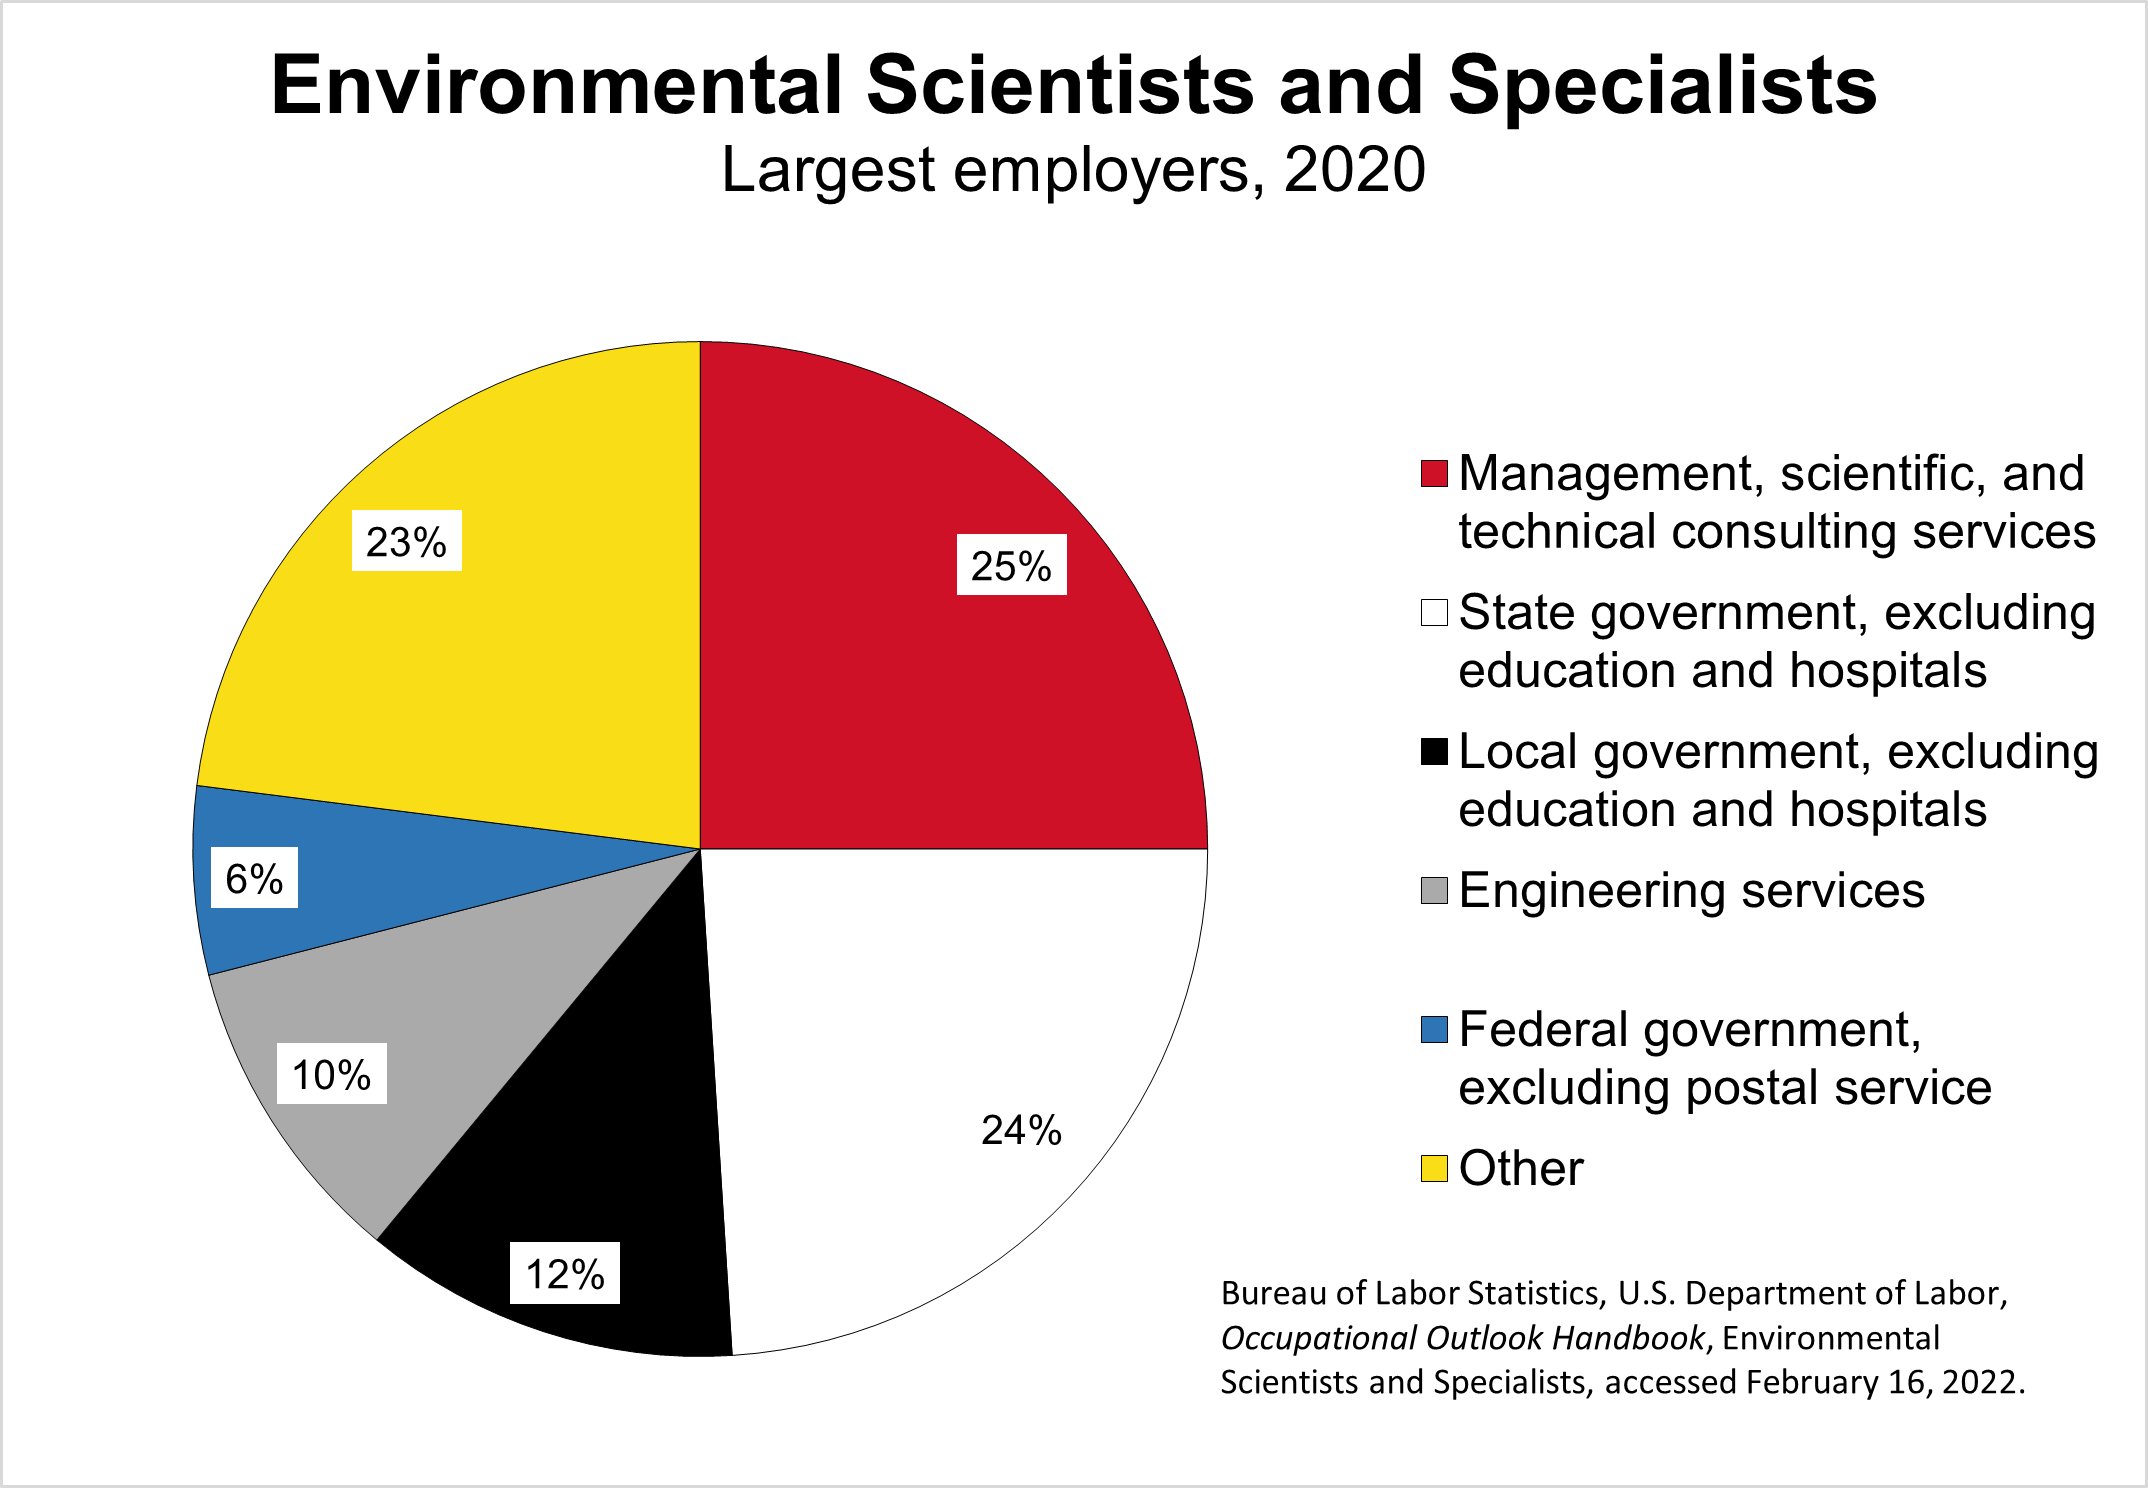 The largest employers of environmental scientists and specialists in 2020 were: management, scientific, and technical consulting services (25%), state government, excluding education and hospitals (24%), local government, excluding education and hospitals (12%), engineering services (10%), federal government, excluding postal service (6%), and other (23%).  Source: Bureau of Labor Statistics, U.S. Department of Labor, Occupational Outlook Handbook, Environmental Scientists and Specialists, accessed February 16, 2022.